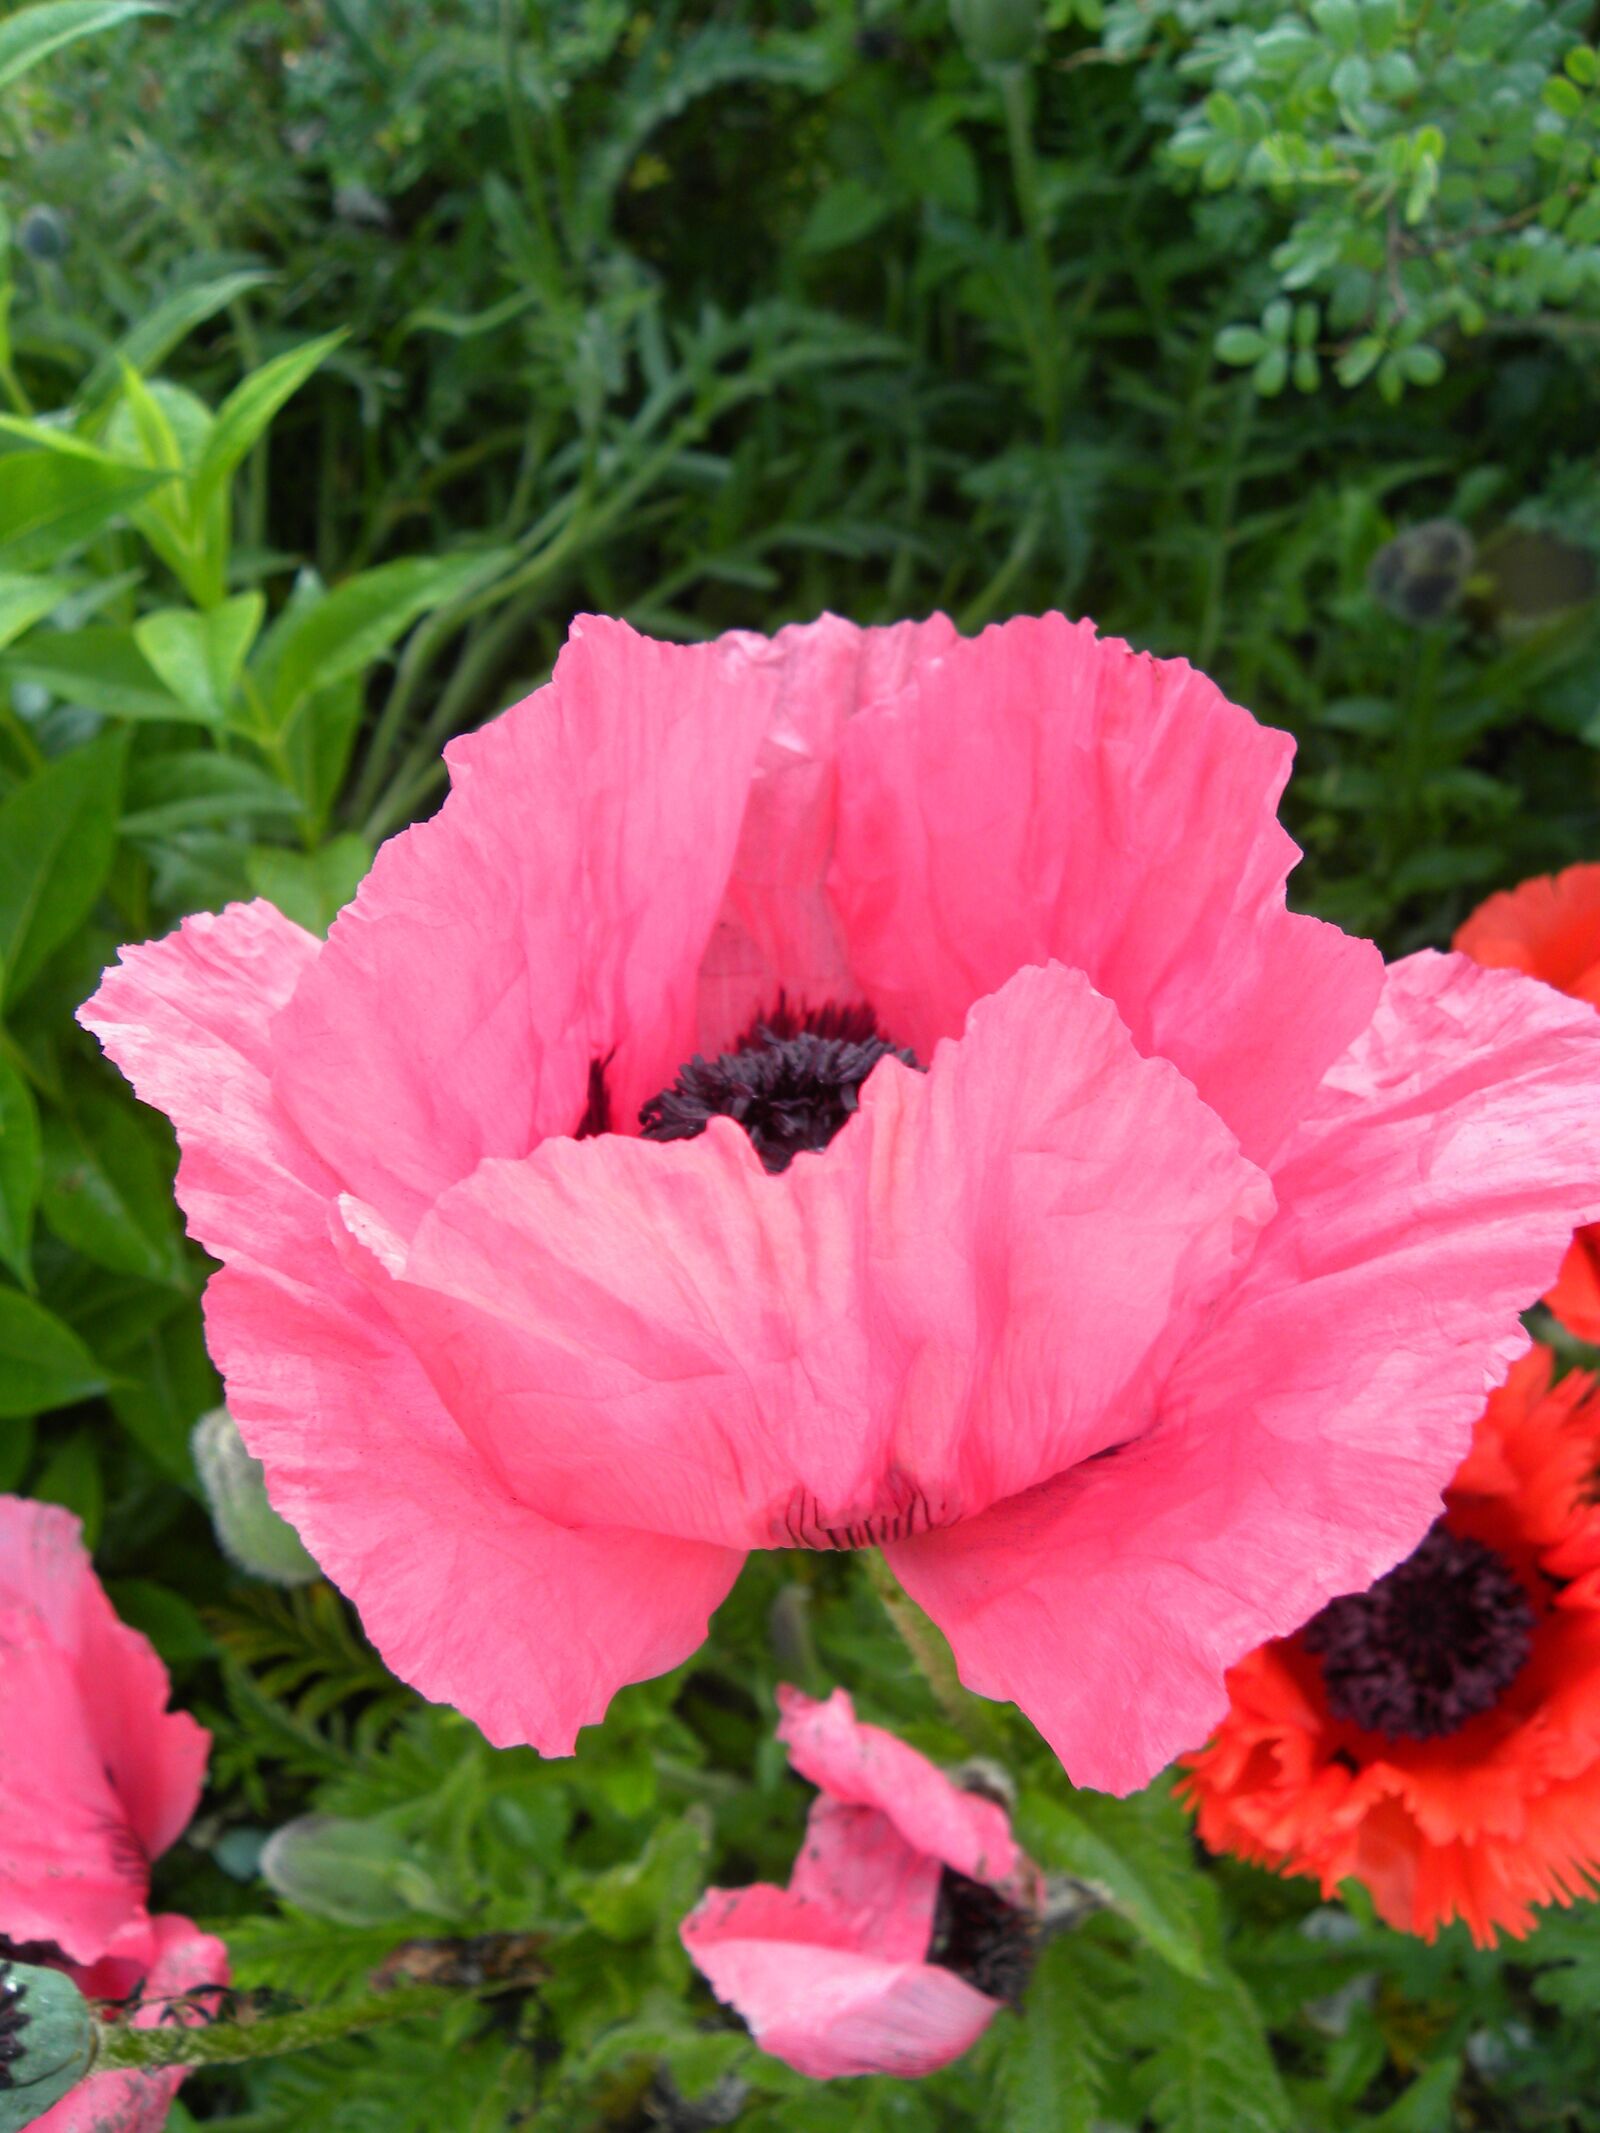 Nikon Coolpix P90 sample photo. Flowers, poppies, spring photography